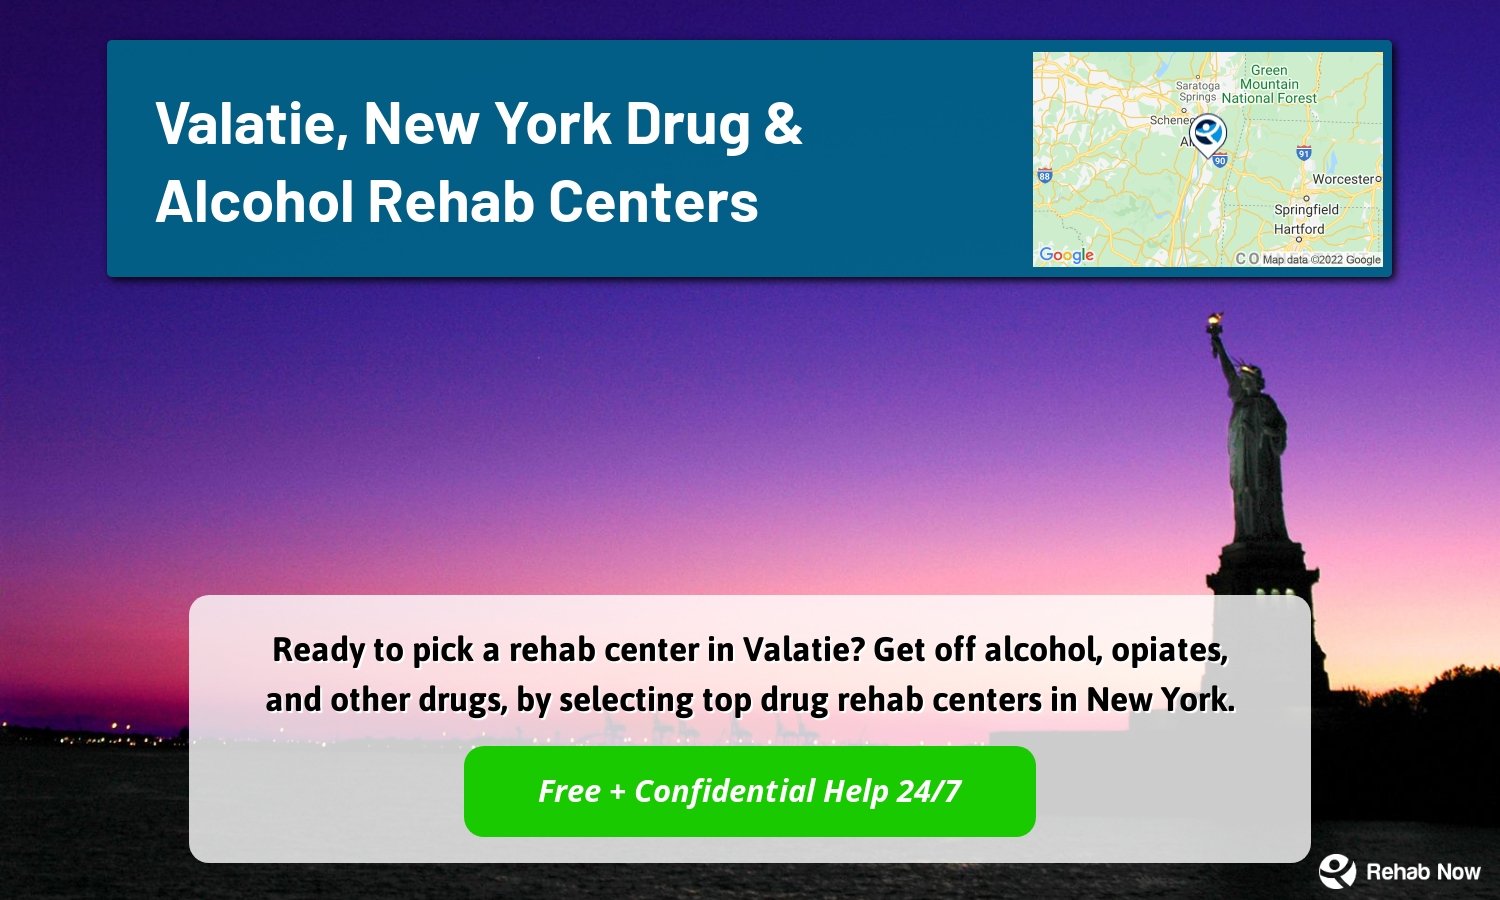 Ready to pick a rehab center in Valatie? Get off alcohol, opiates, and other drugs, by selecting top drug rehab centers in New York.